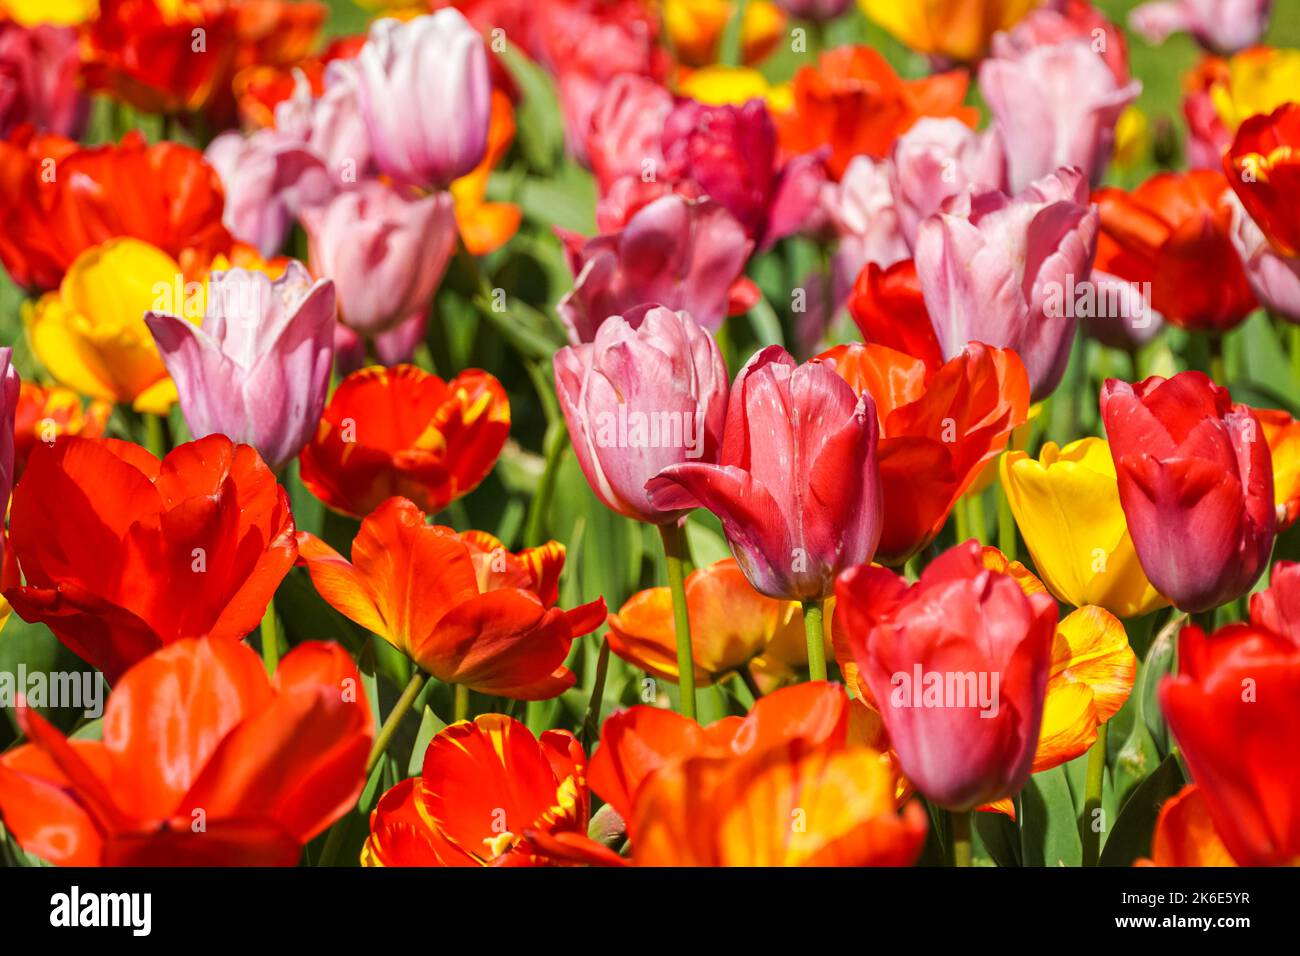 Pink tulips, red tulips and yellow tulips growing on a flowerbed Stock Photo